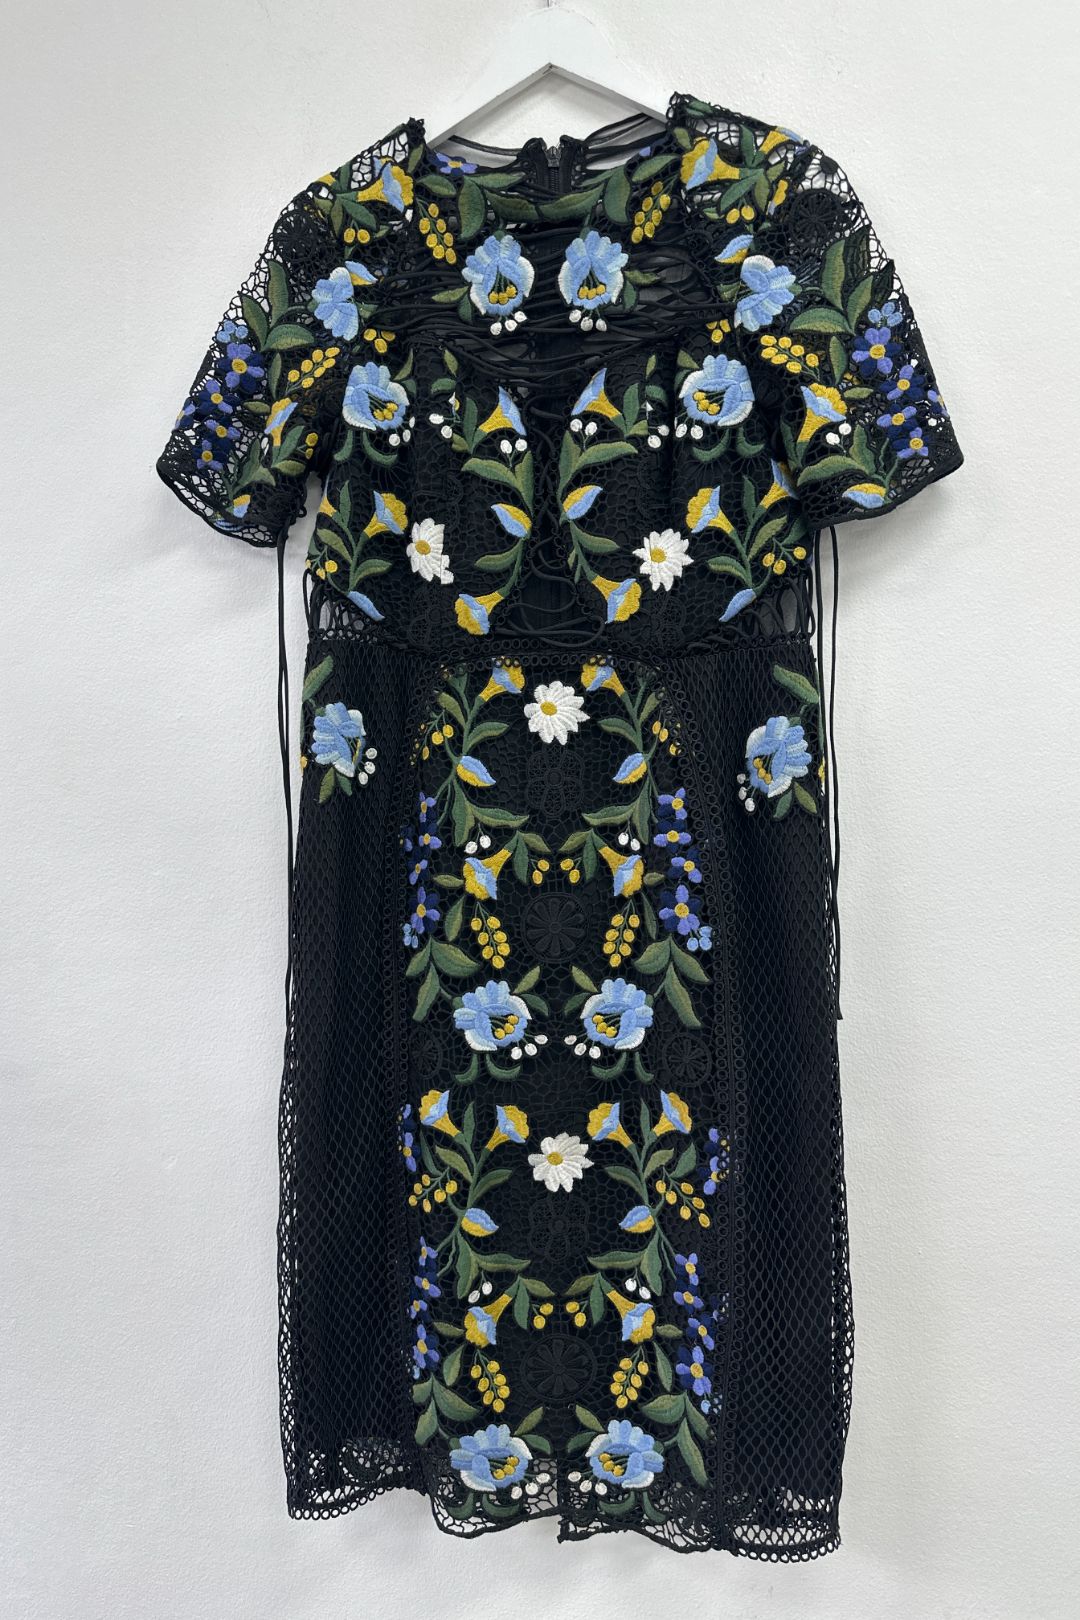 Thurley Floral Embroidered Vasette Lace Dress